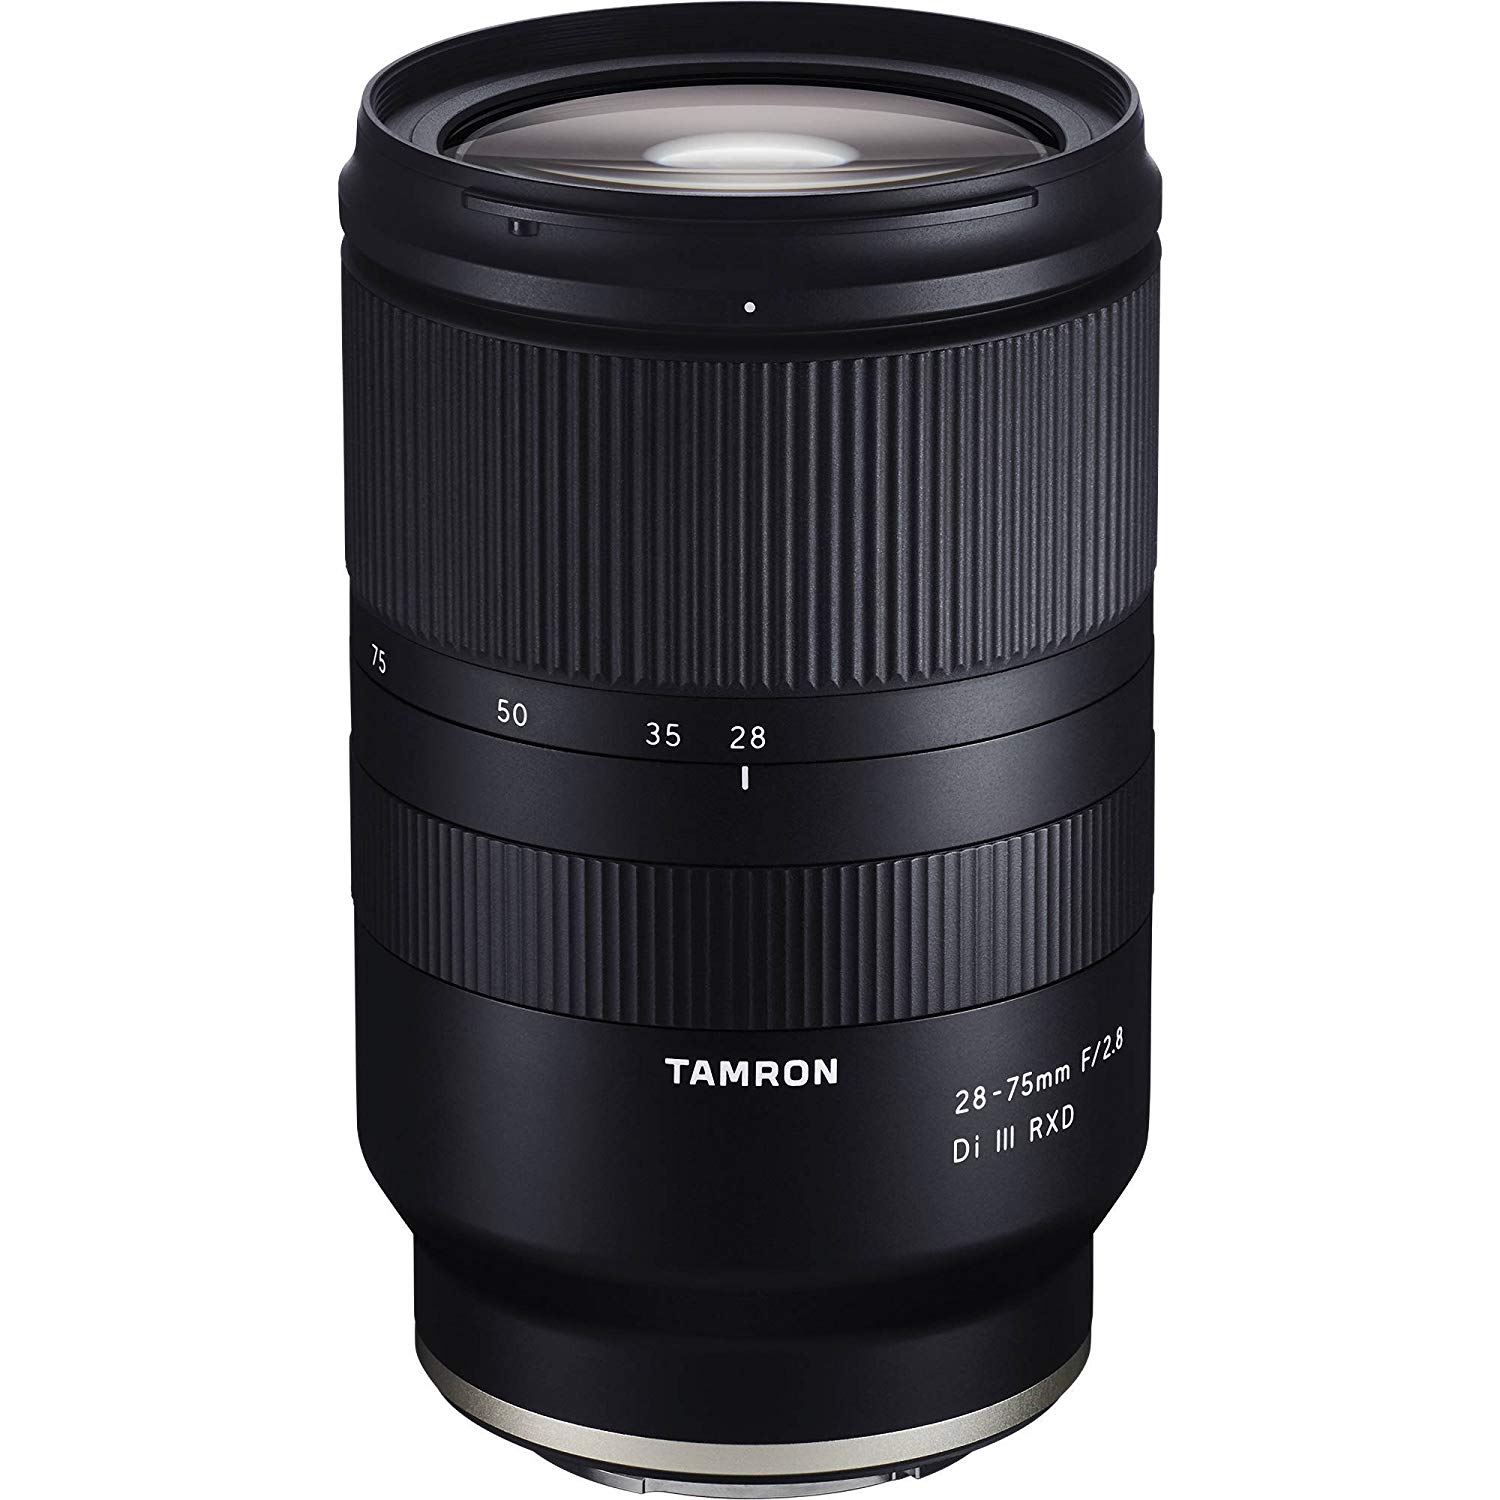 Tamron Objectif  Di III RXD 28-75mm f / 2.8 pour Sony E-Mount